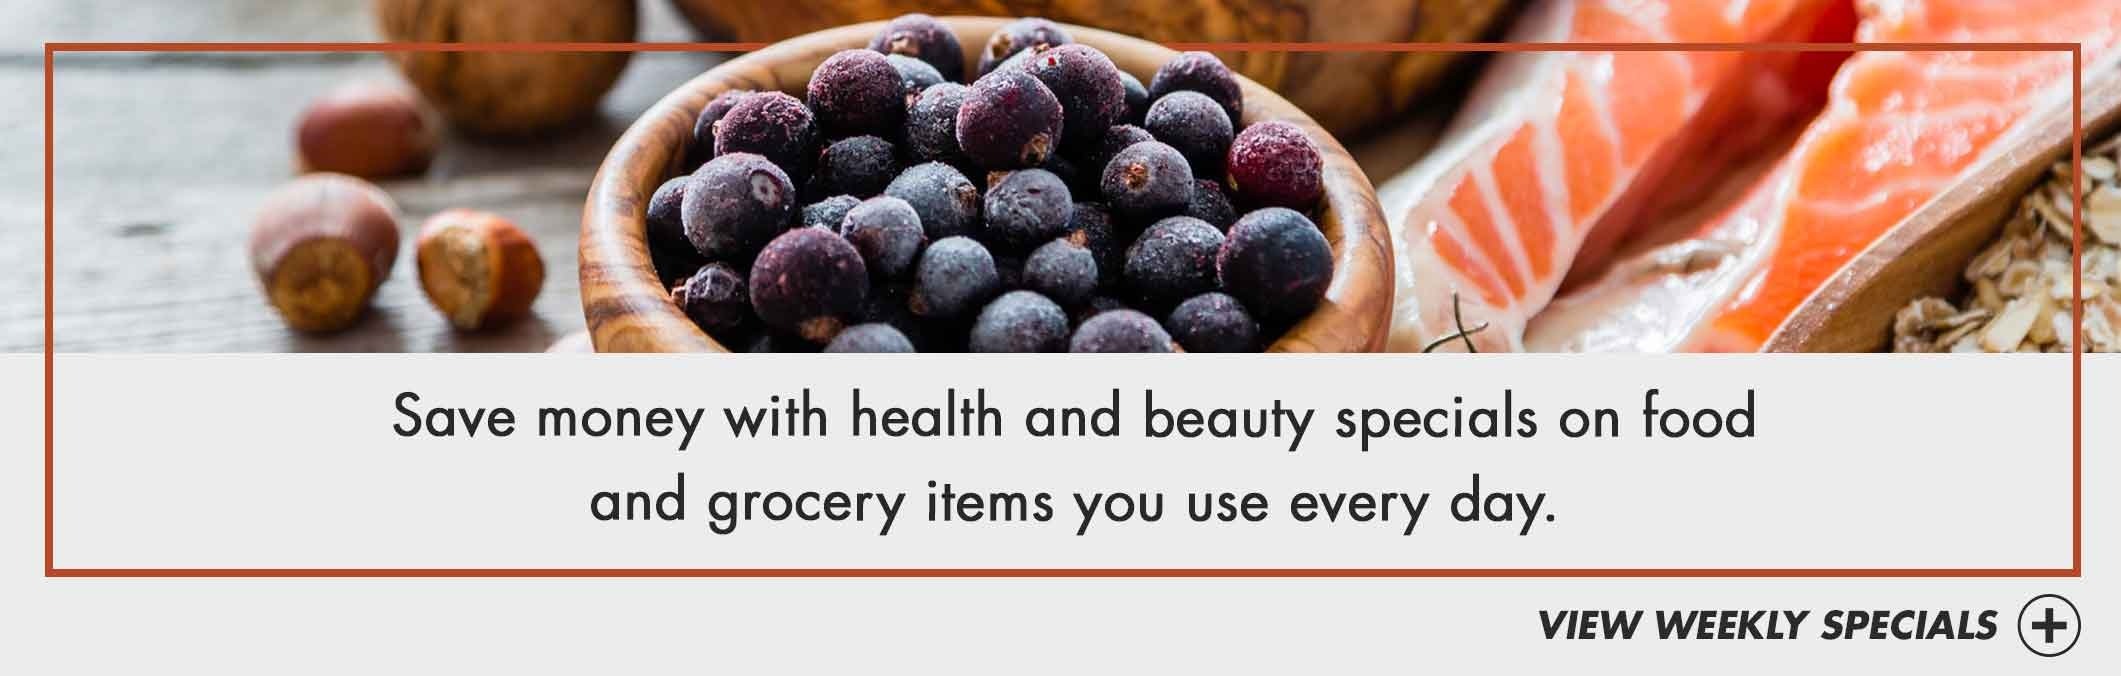 Save money with health and beauty specials on food and grocery items you use every day.